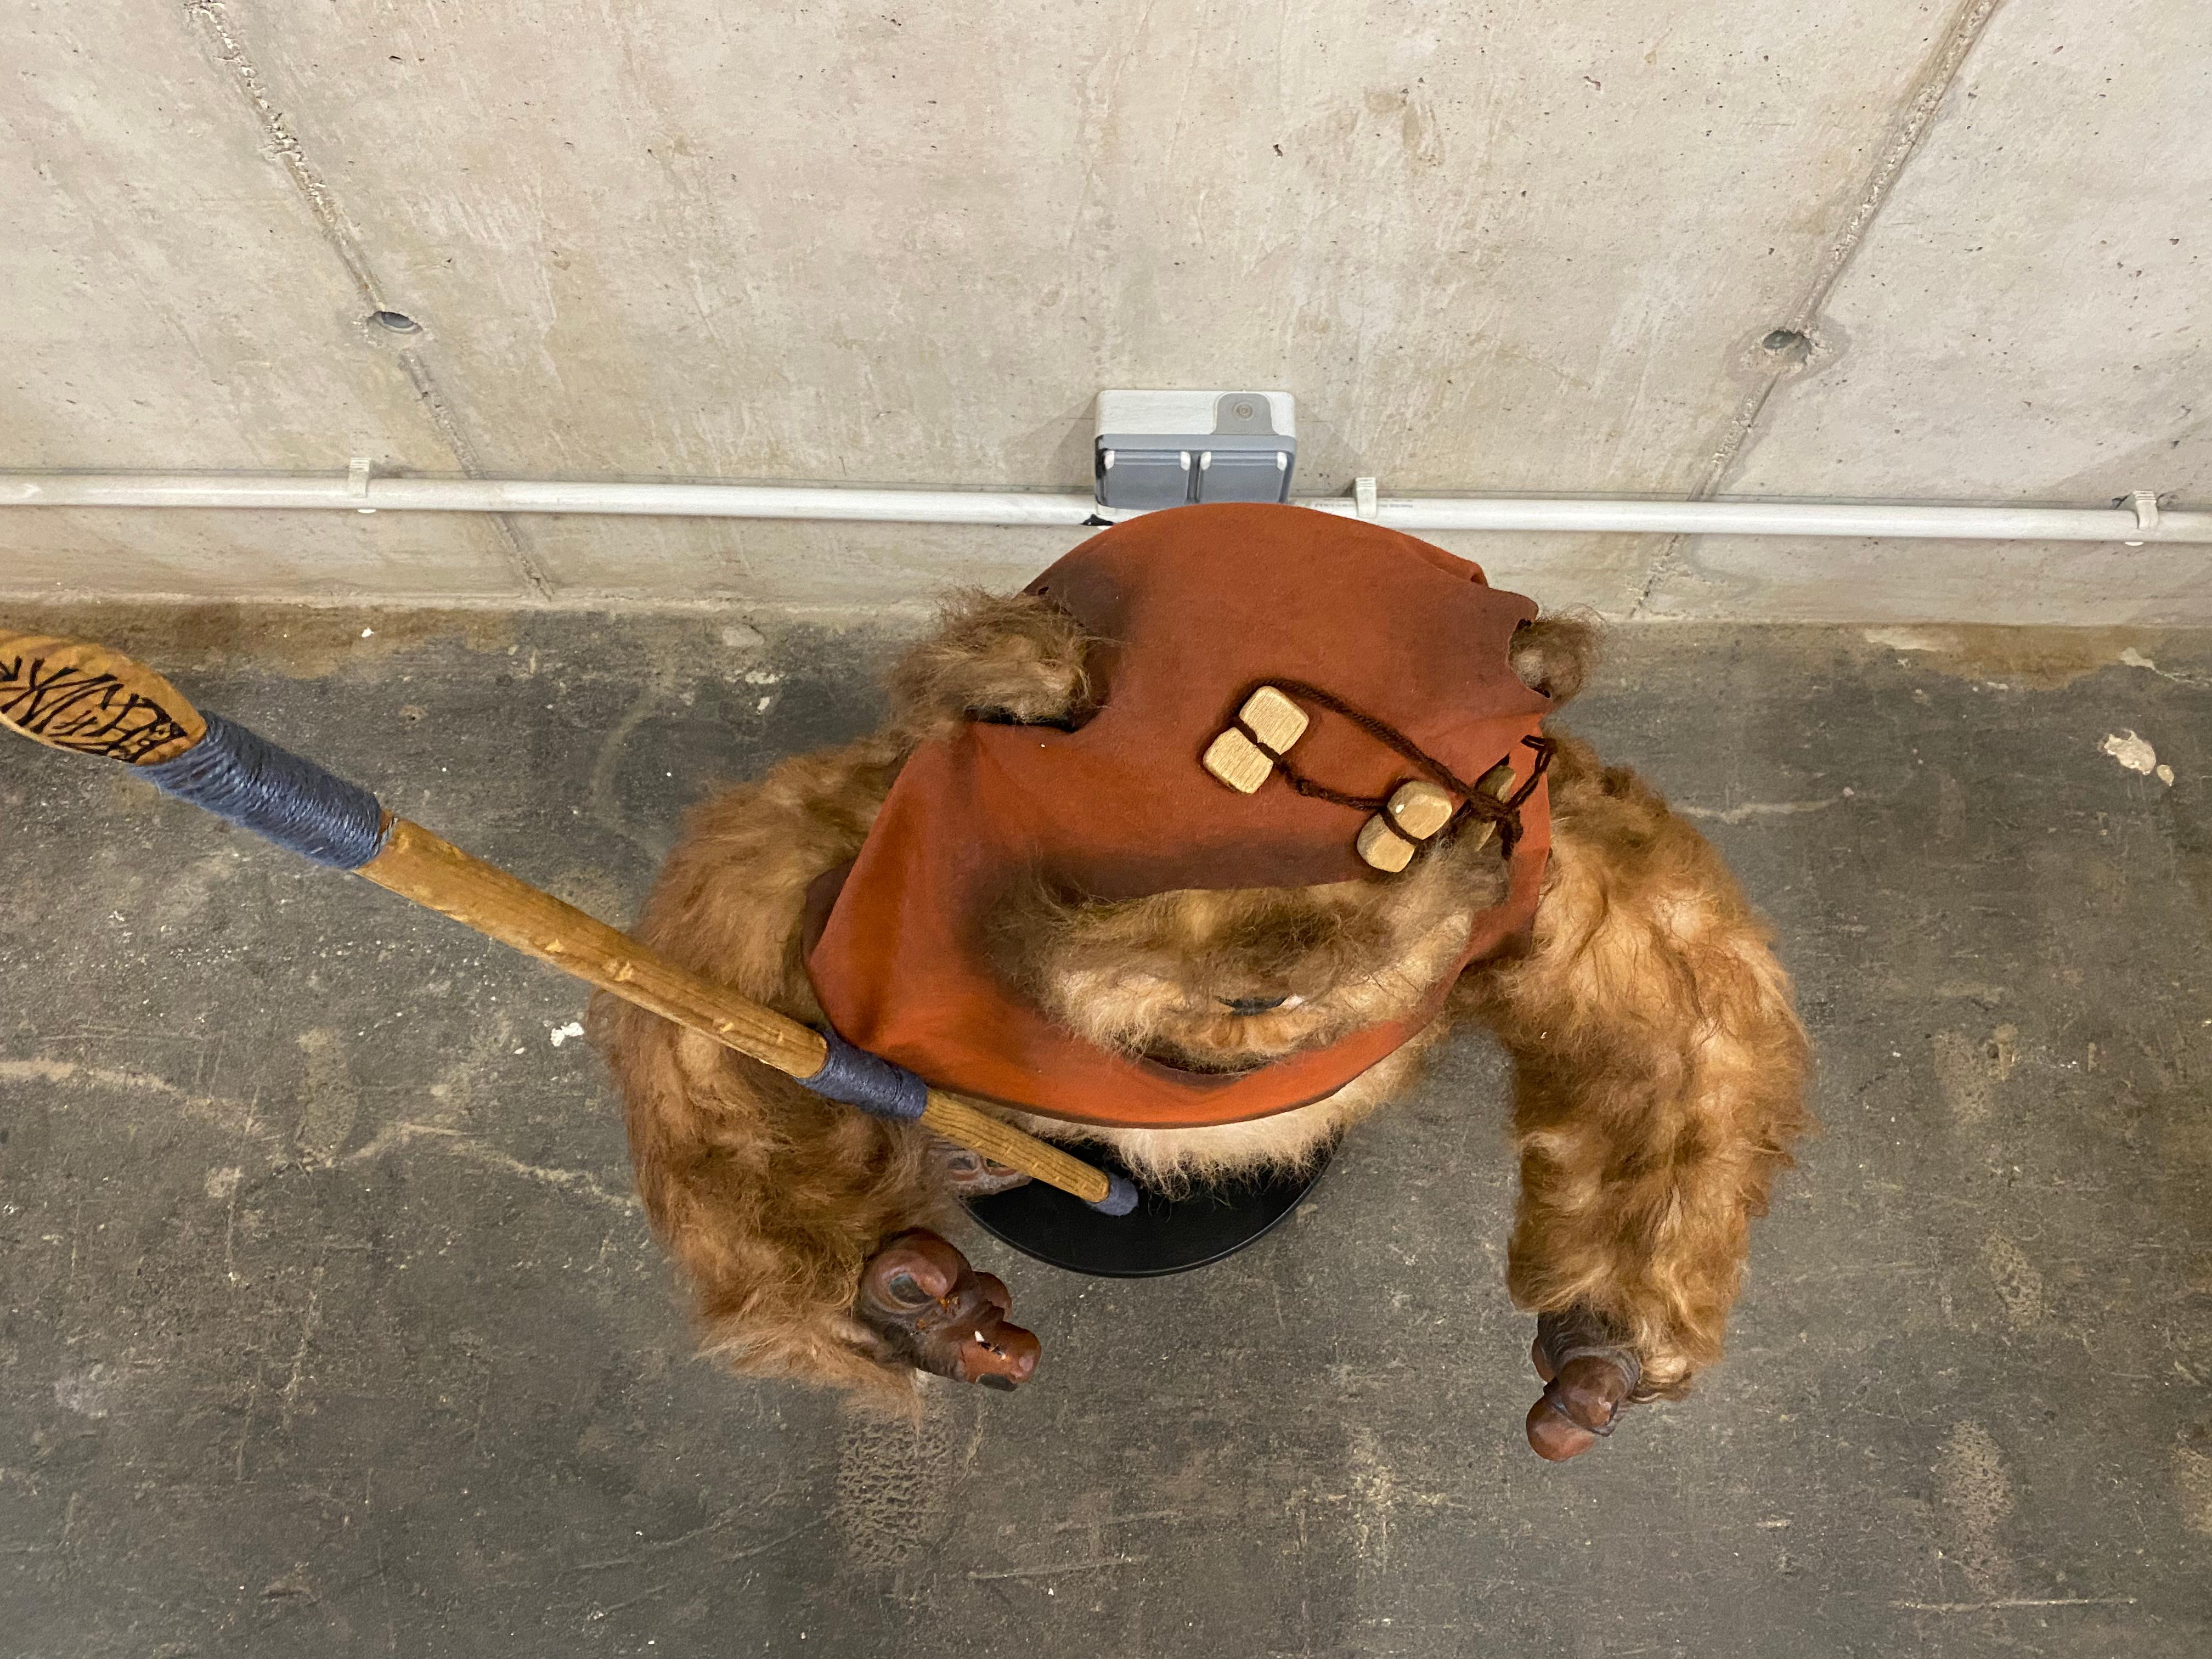 Late 20th Century Life Size Wicket Ewok Figure, Edition of 50 Pieces, Star Wars Photo Requisite